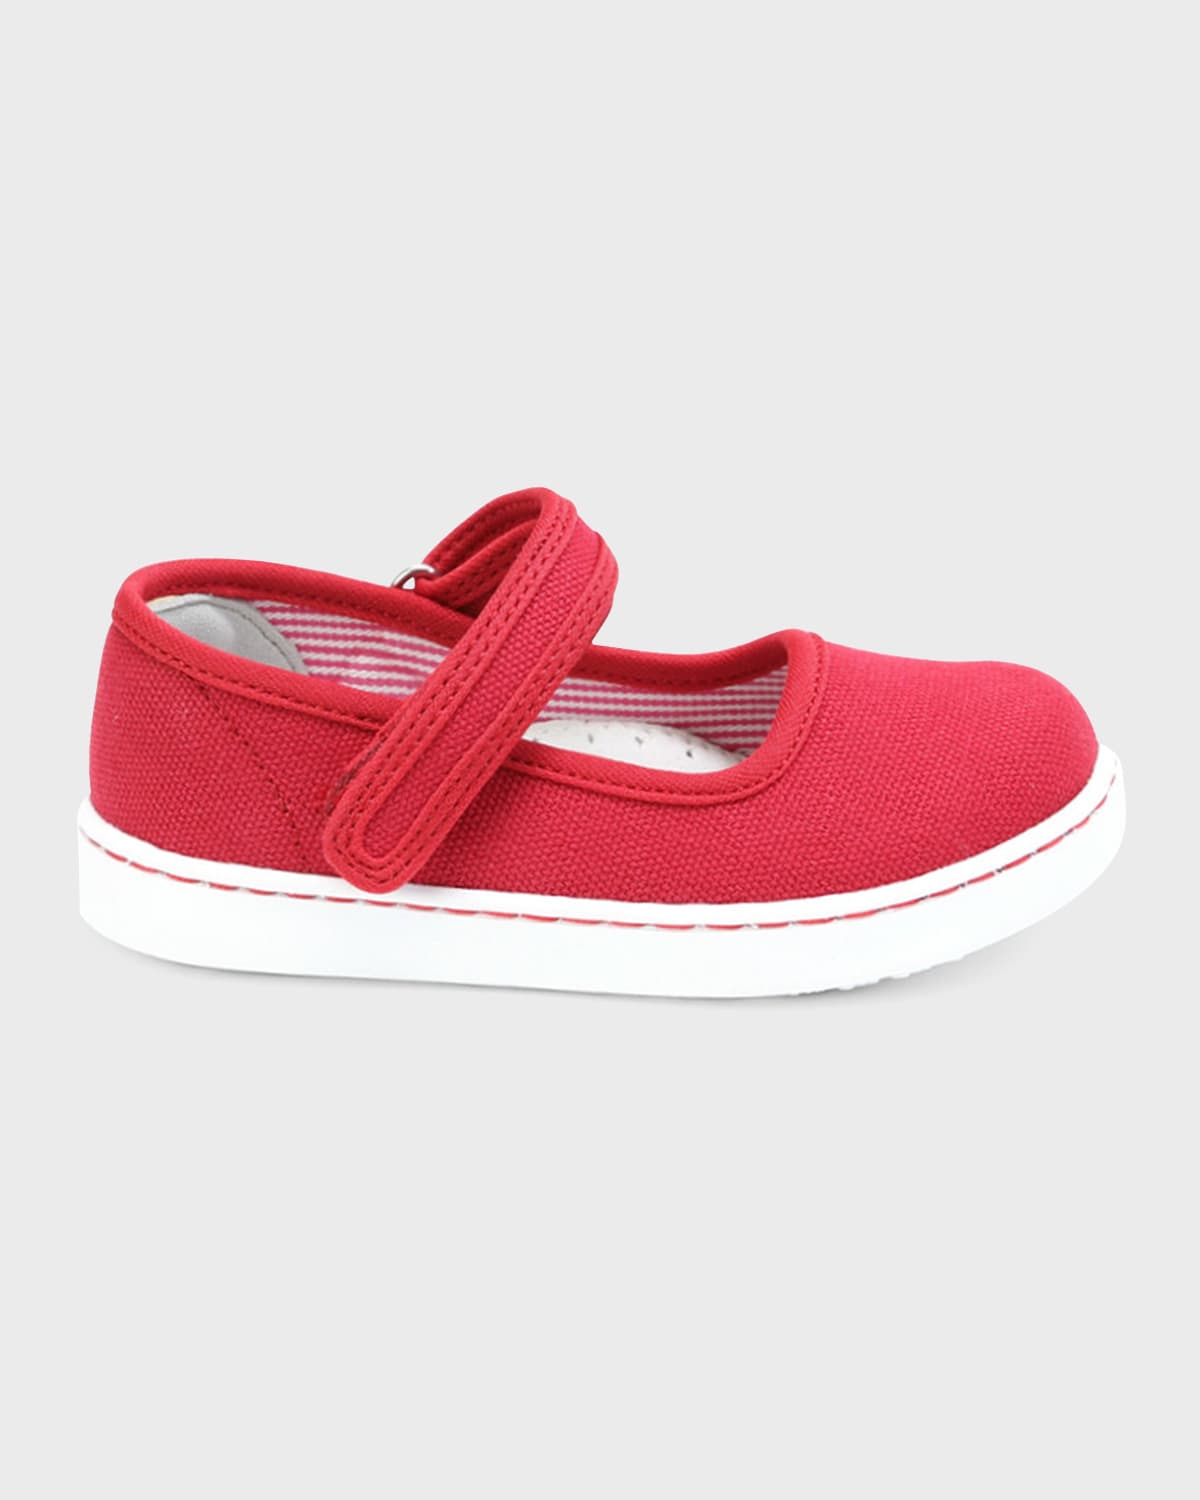 L'amour Shoes Girl's Jenna Canvas Mary Jane Shoes, Baby/toddler/kids In Red